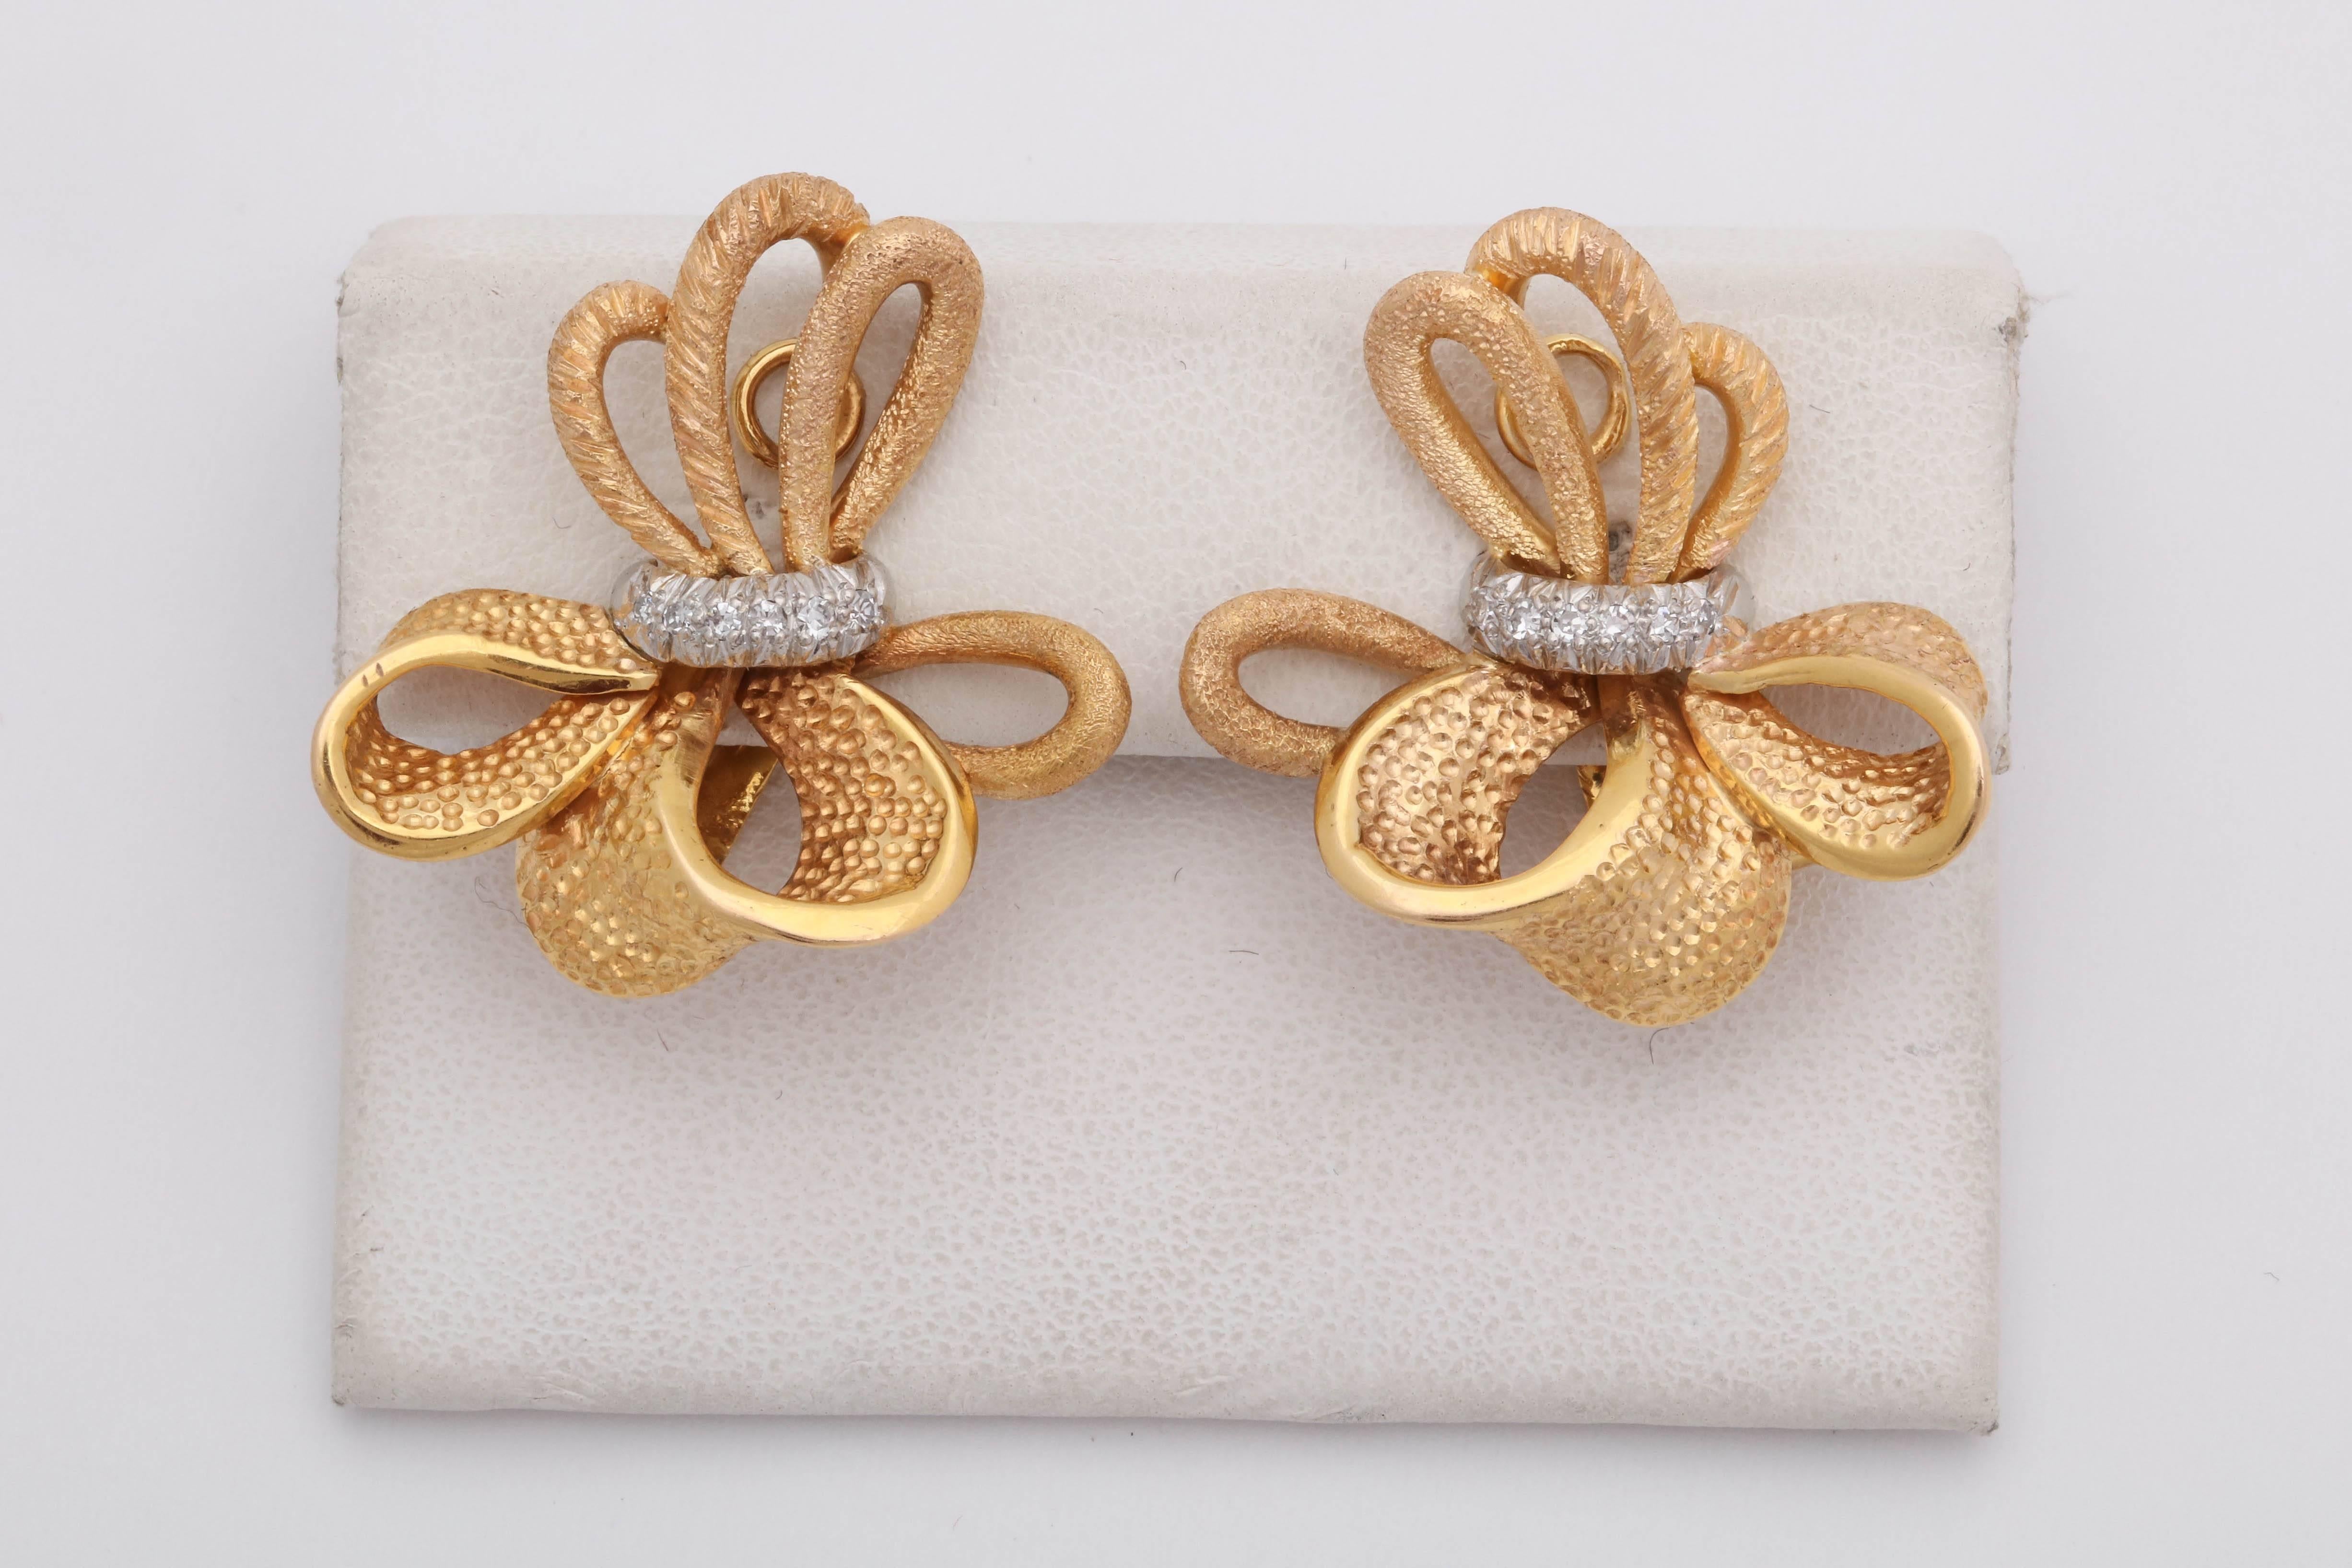 One Pair Of Ladies Bow Knot Design Bow Earrings Designed In 18kt Gold. In Center Of Earrings Are 16 Diamonds Weighing Approximately .90 Cts Total Weight. NOTE:Fancy Clip On Earrings May Add Posts For Pierced Ears. Designed In The 1960's In The